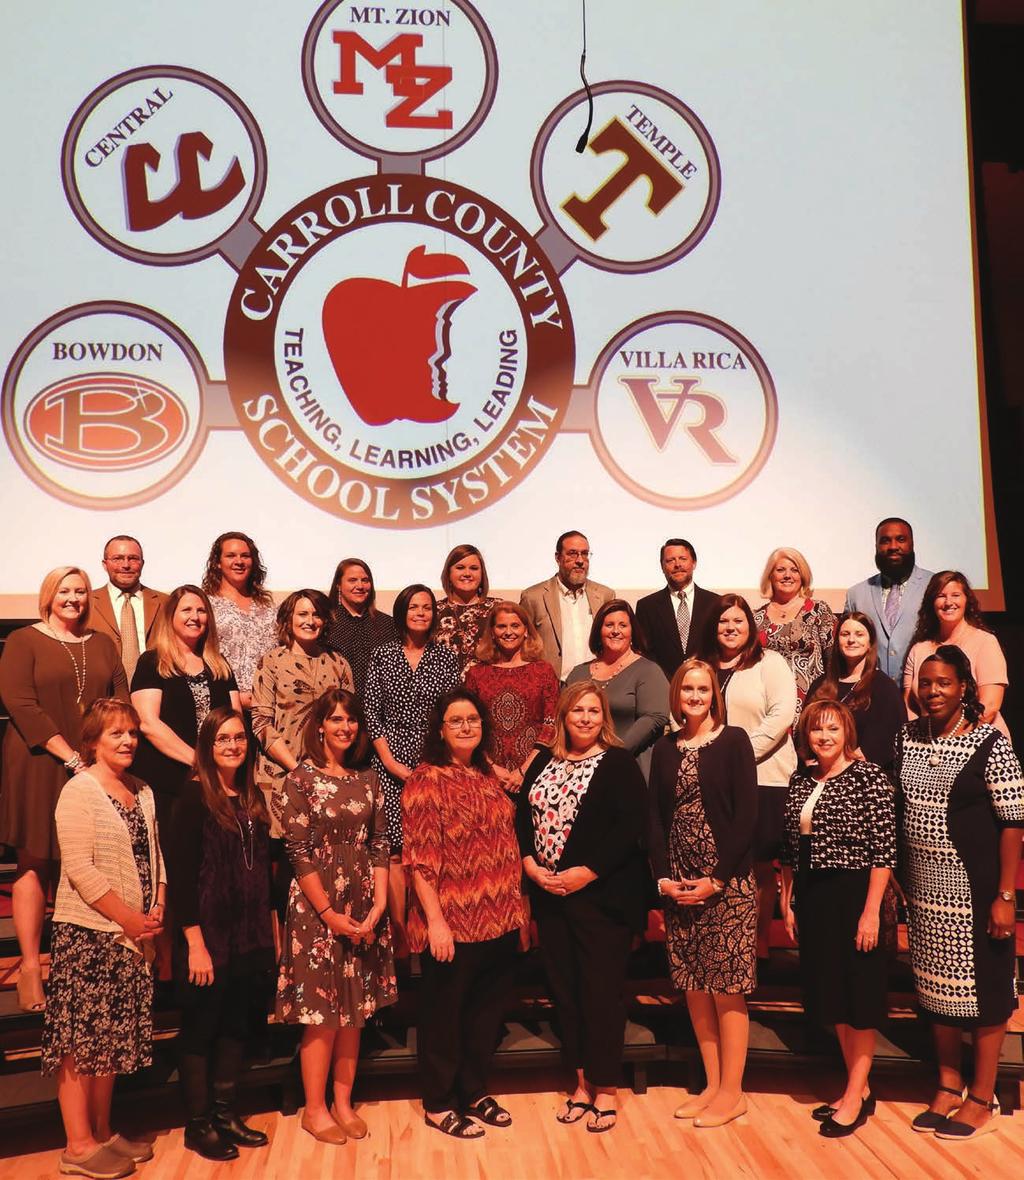 Teachers of the Year The Carroll County School System has premier teachers who are committed to positively changing the lives of all students.